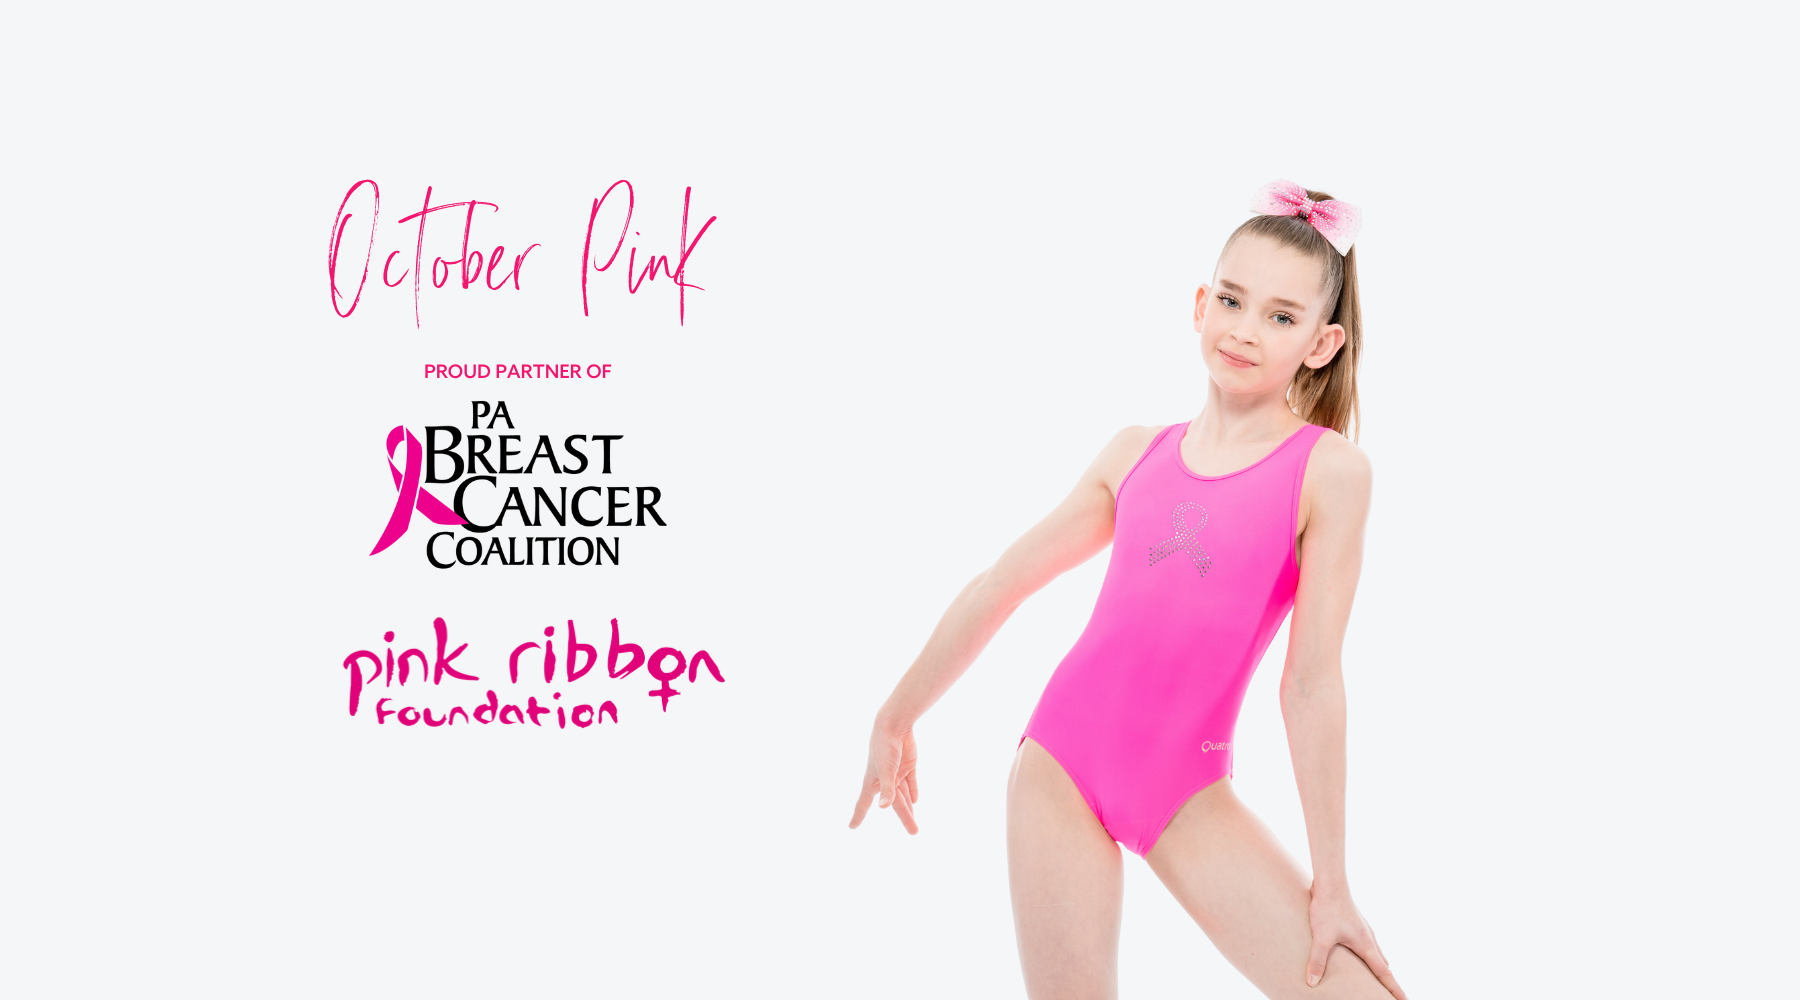 October Pink - A Drive for Breast Cancer Awareness with Quatro Gymnastics